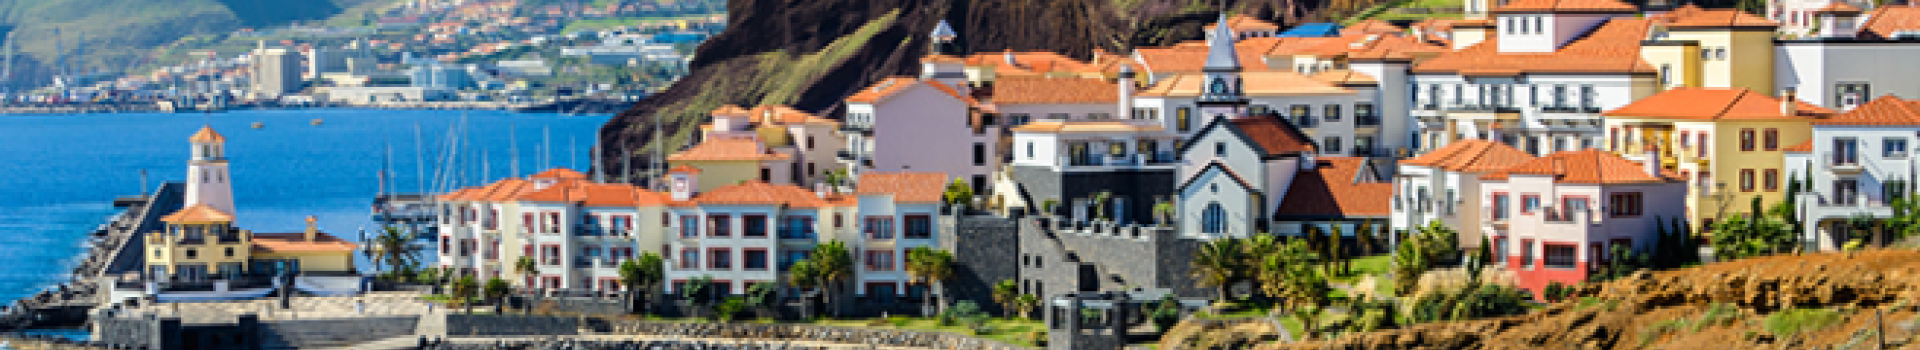 Cheap Holidays to Madeira with Cassidy Travel